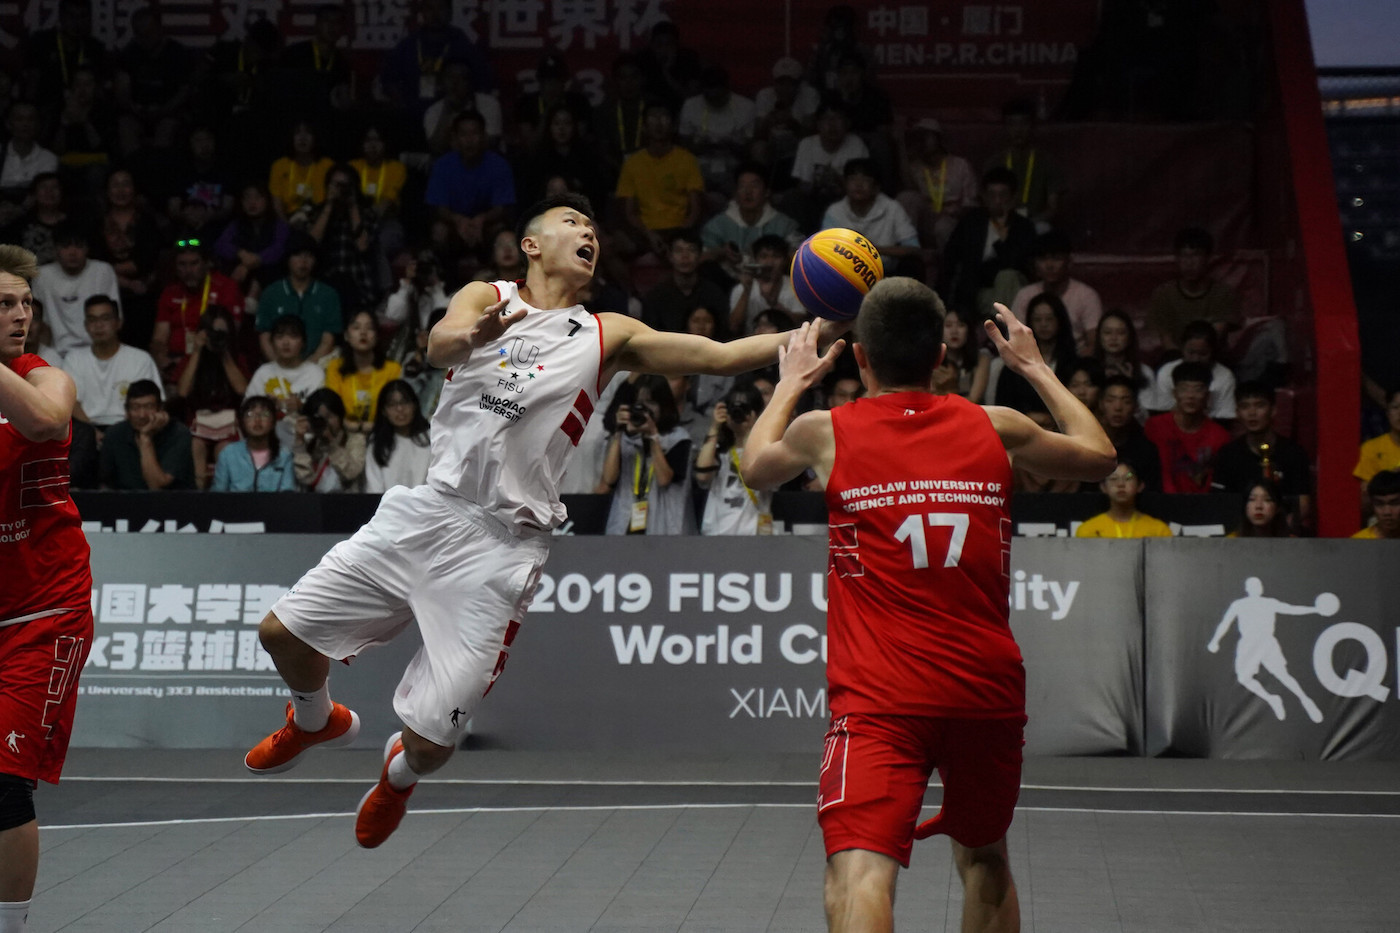 FISU already recognises 3x3 basketball but is yet to do so for next year's Olympic debutant breaking ©FISU